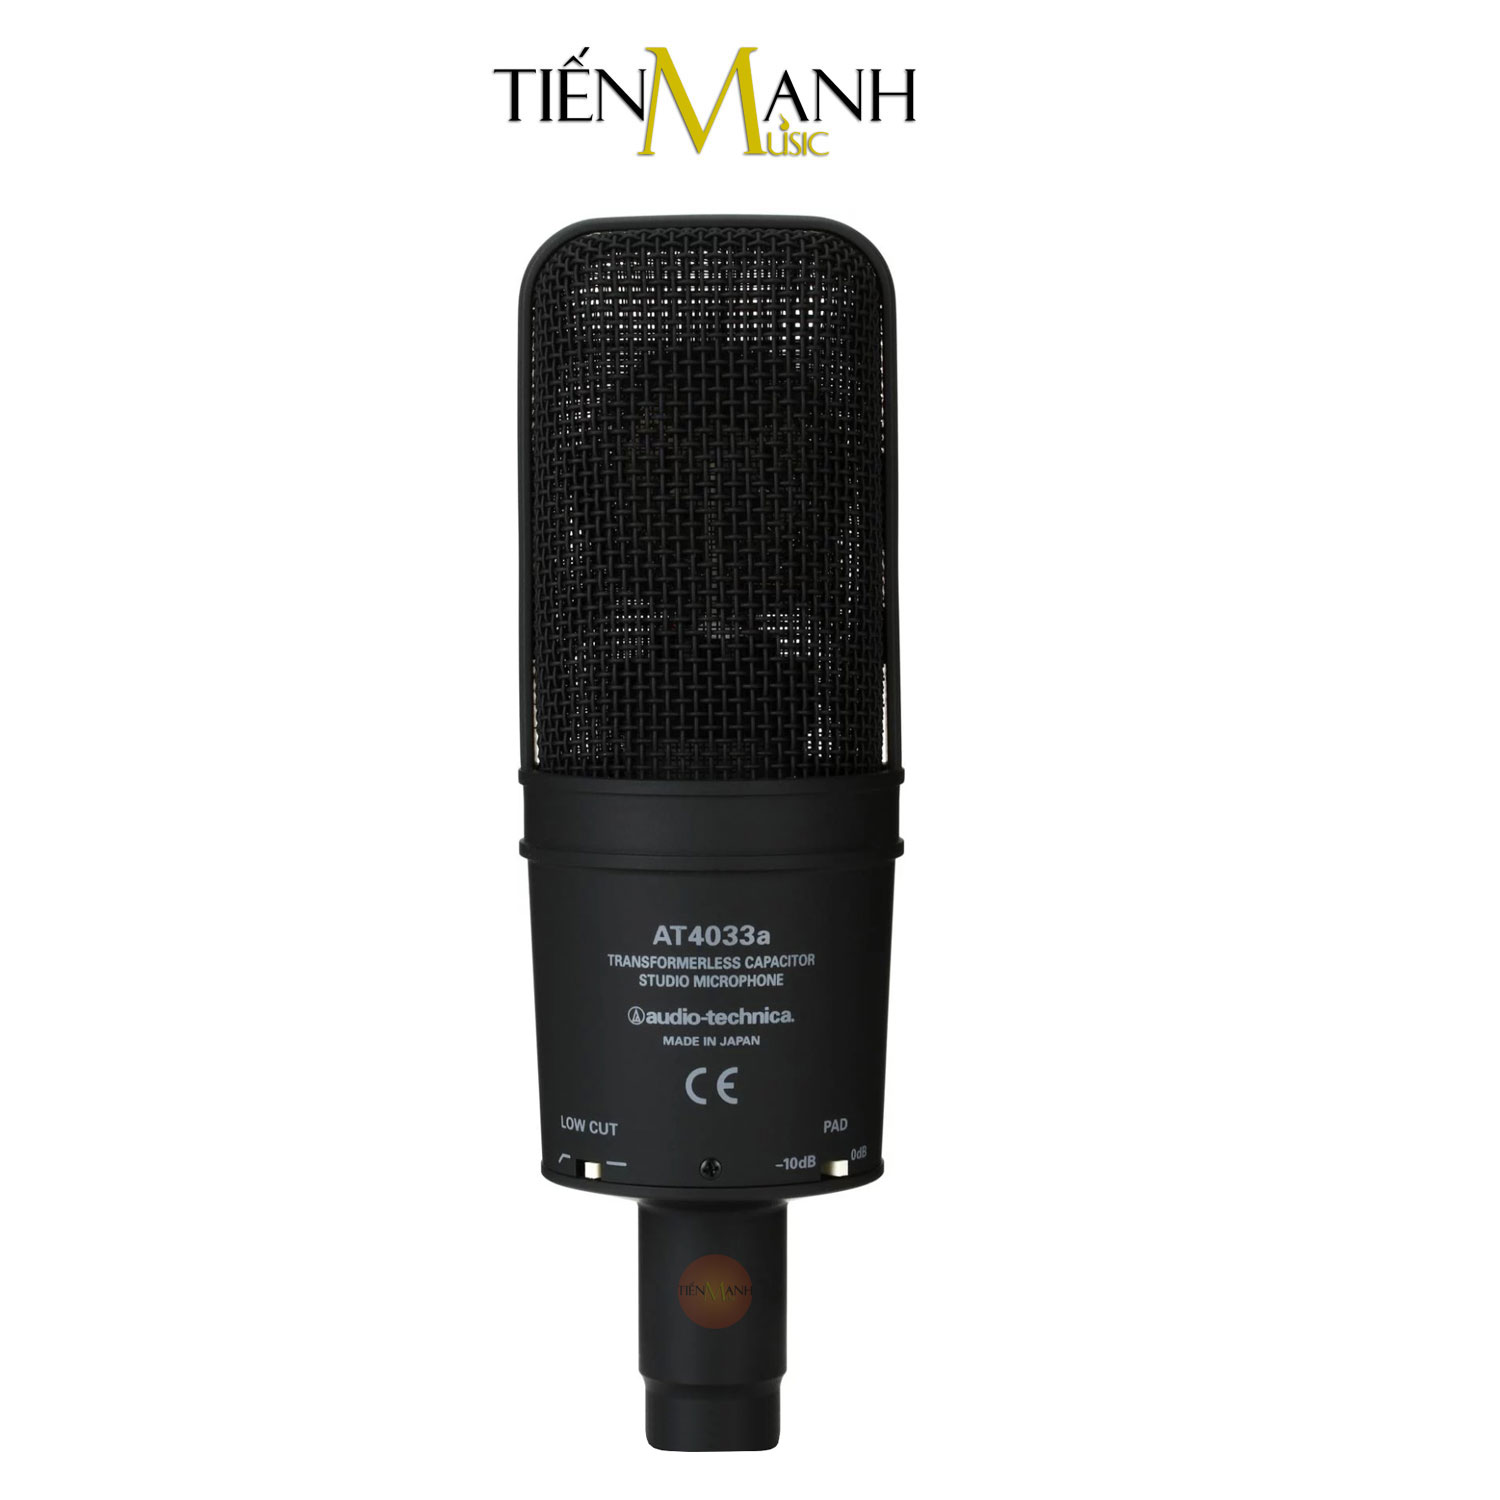 Cach-su-dung-Mic-audio-technica-AT4033.jpg